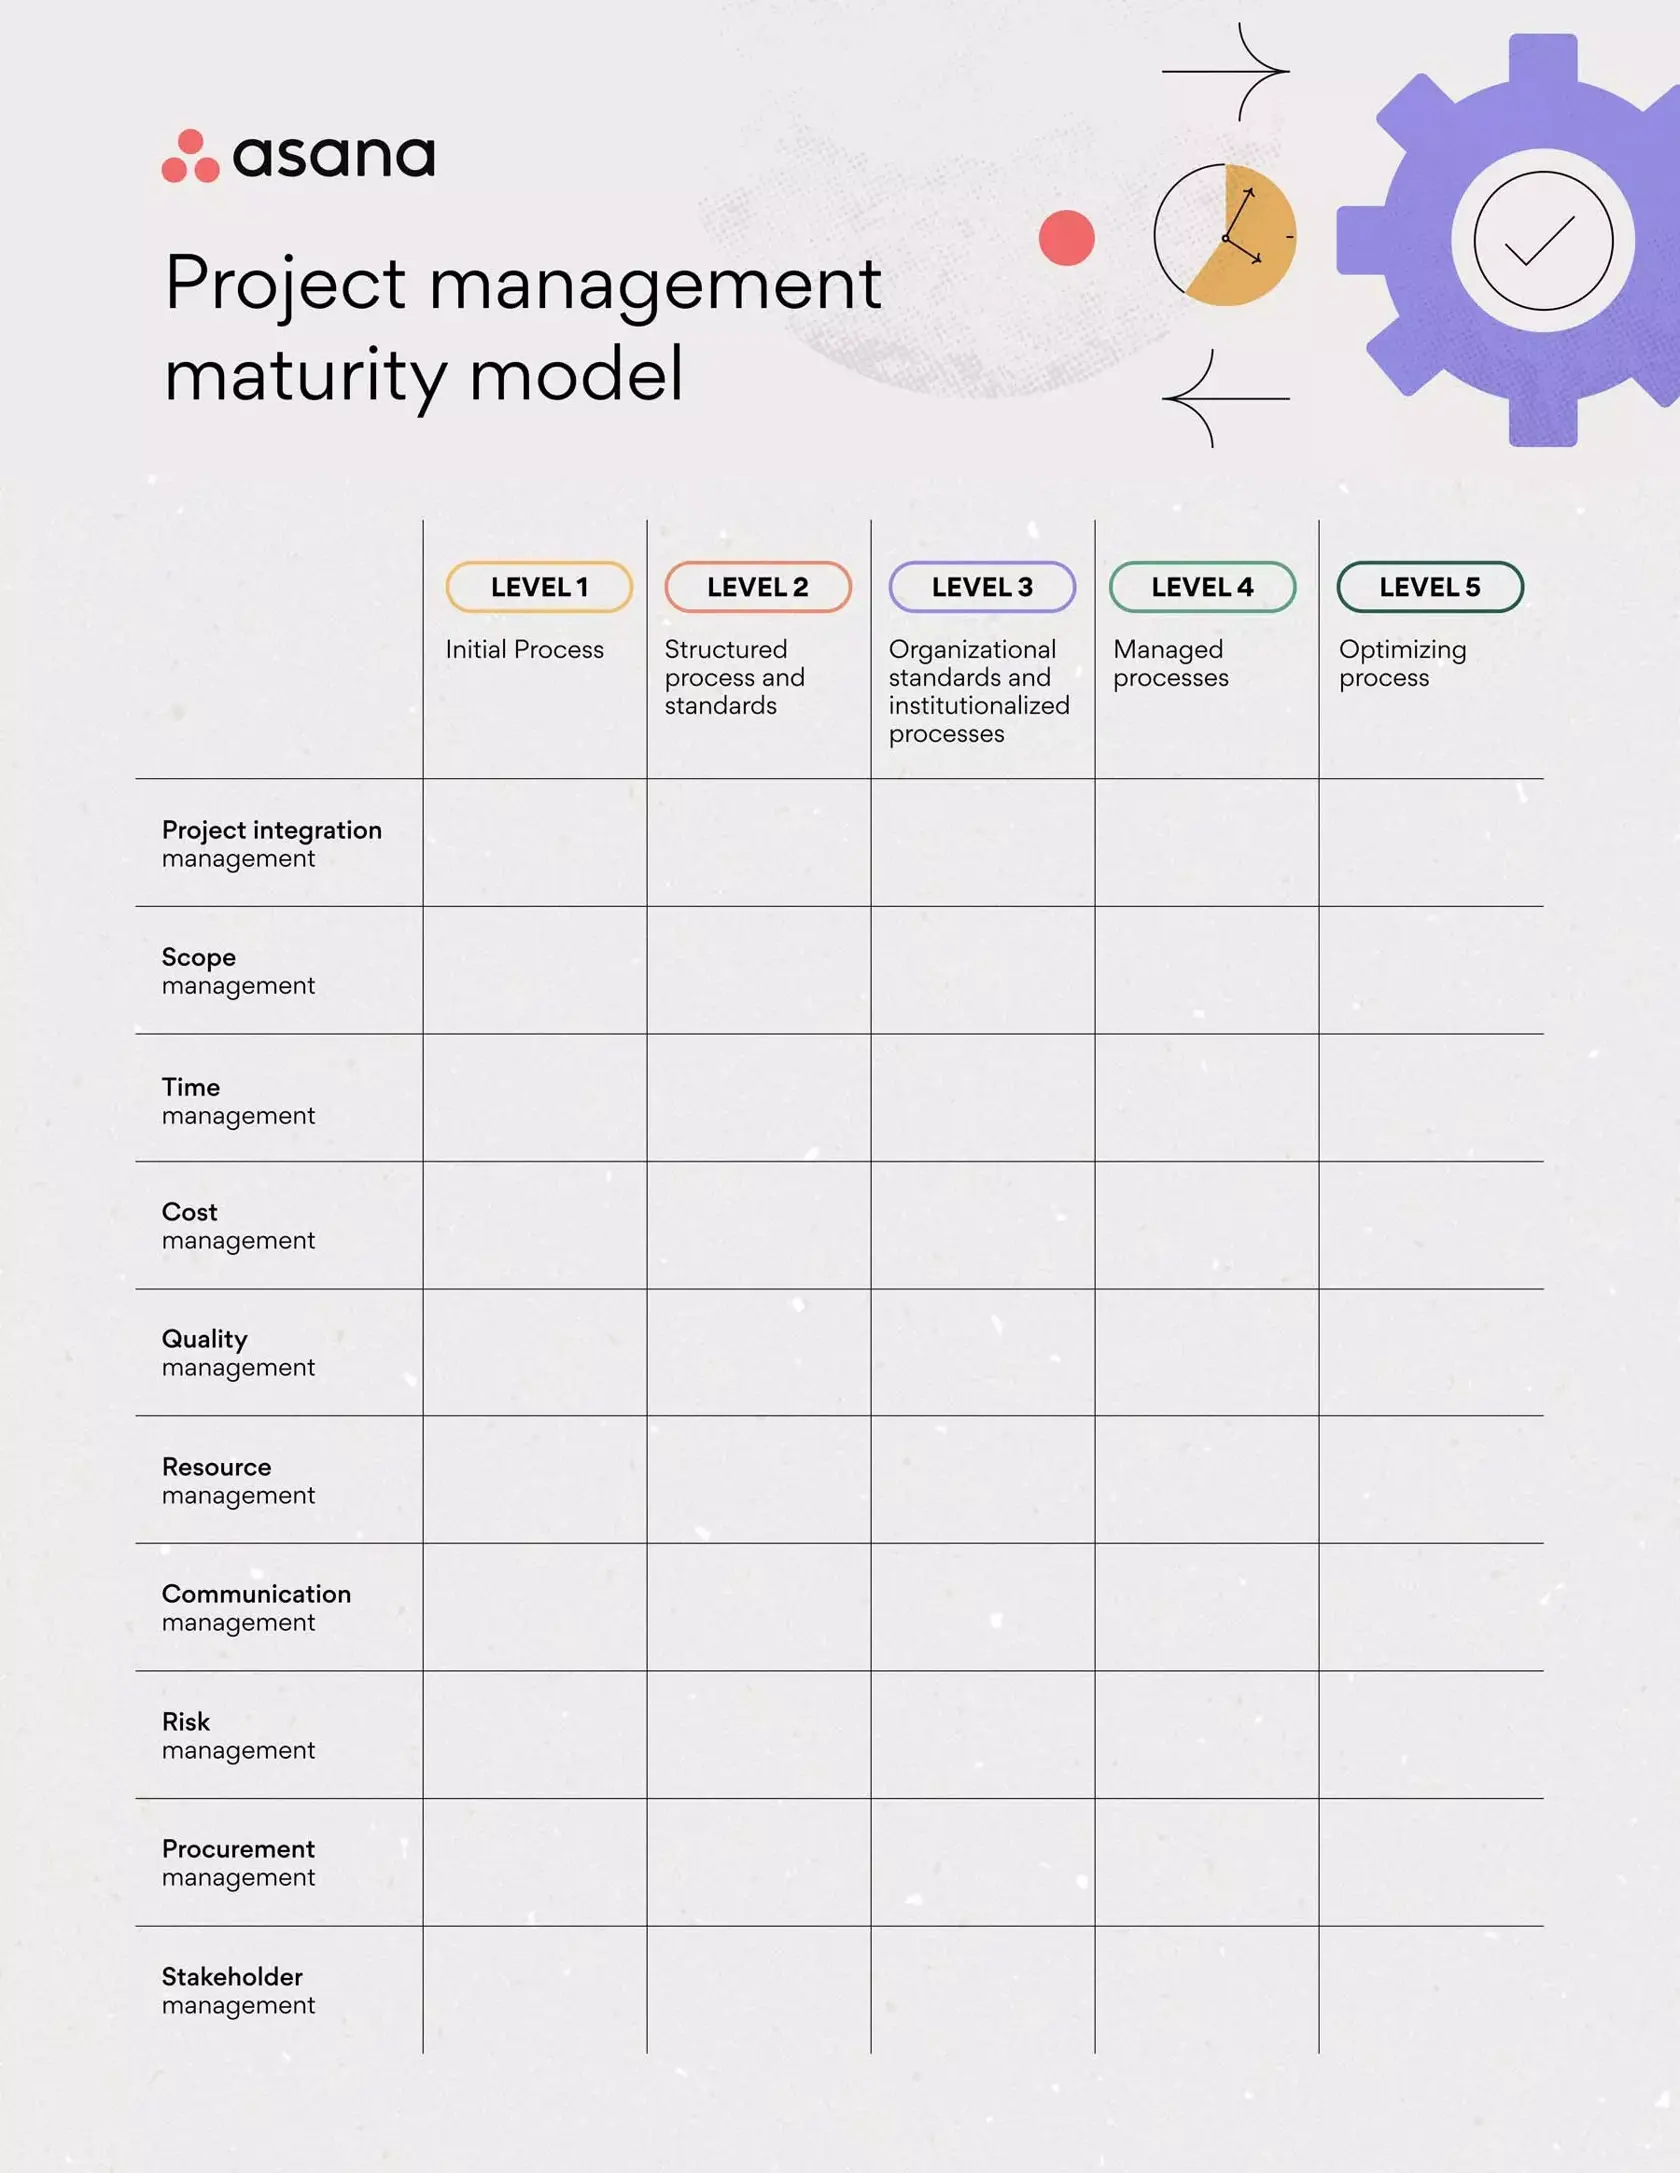 [Inline illustration] Project management maturity model (example)